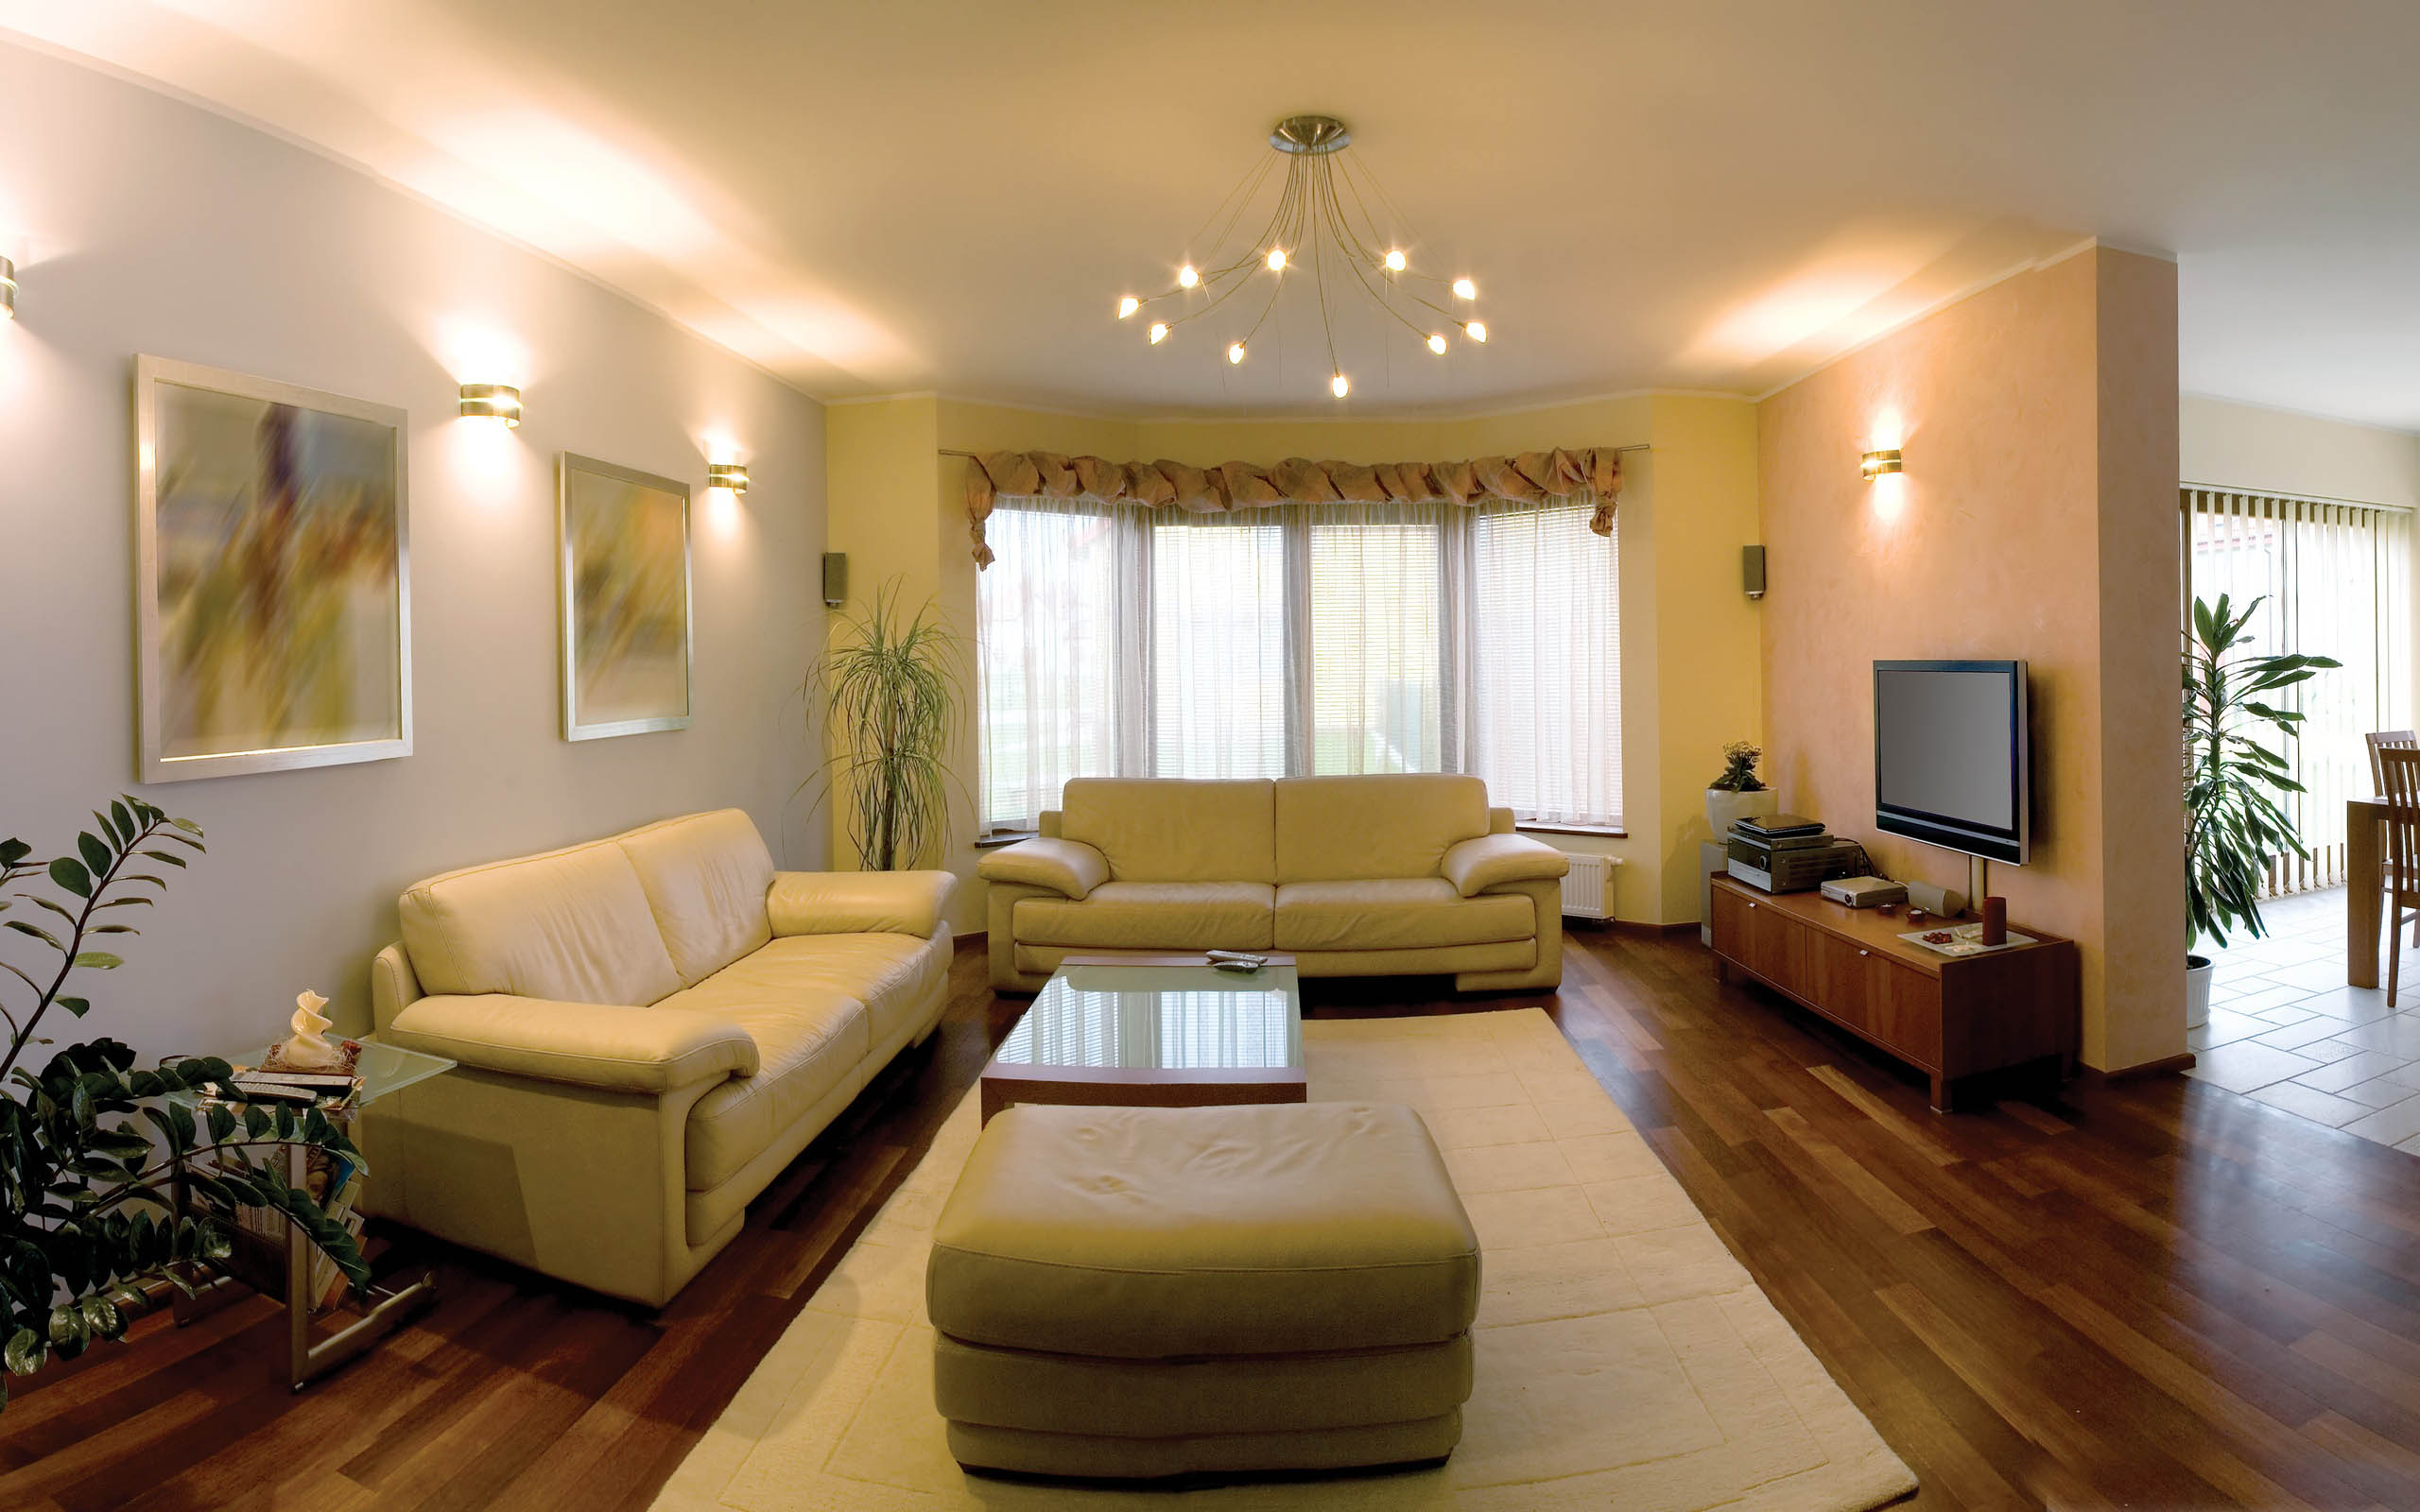 An example of a living room